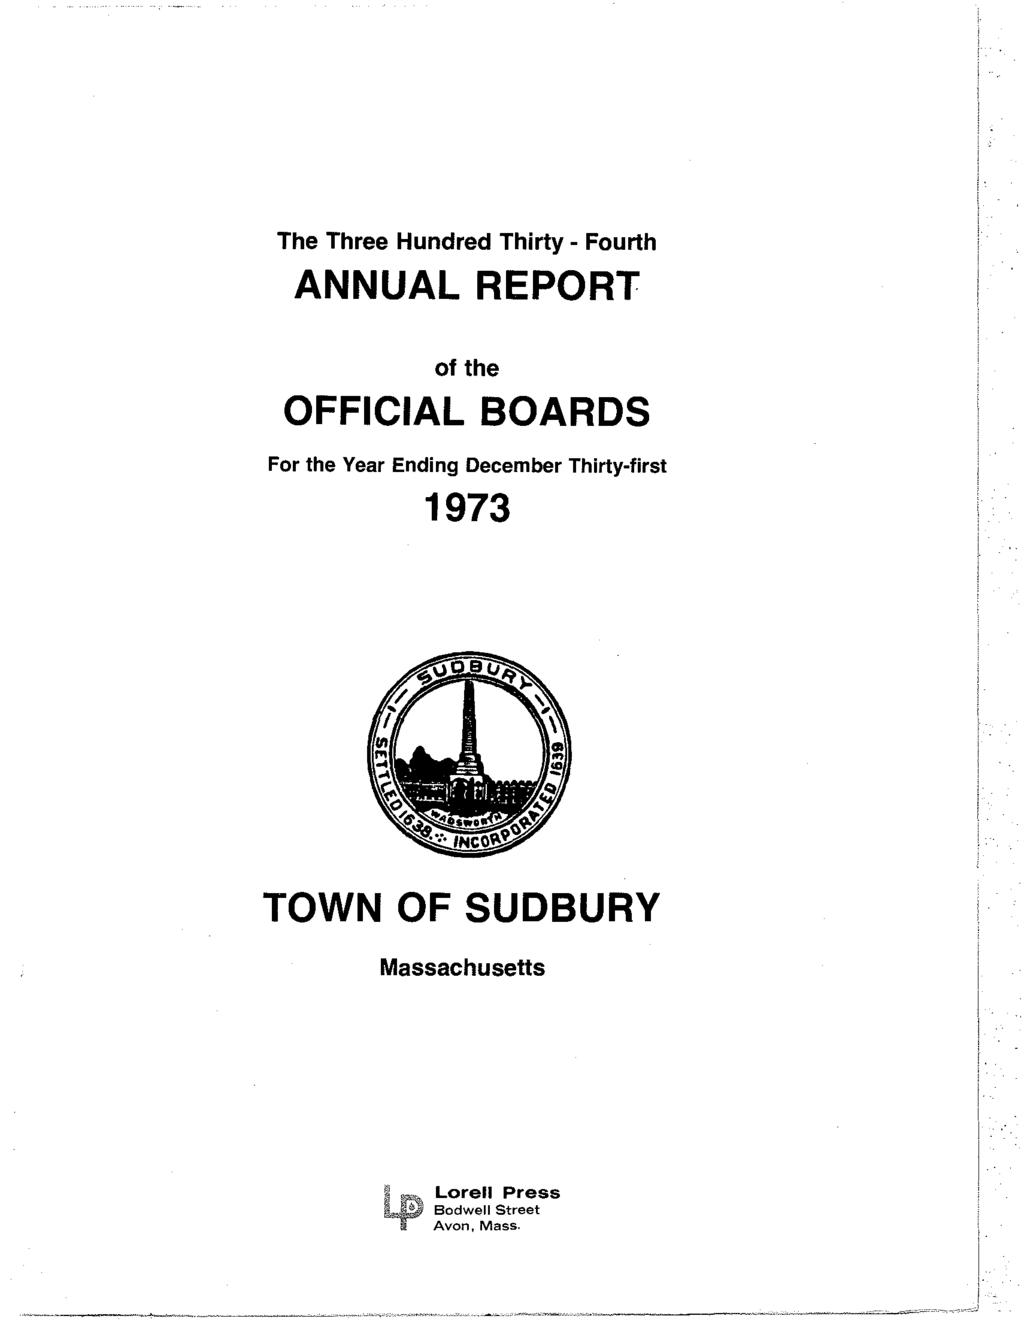 The Three Hundred Thirty - Fourth ANNUAL REPORT of the OFFICIAL BOARDS For the Year Ending December